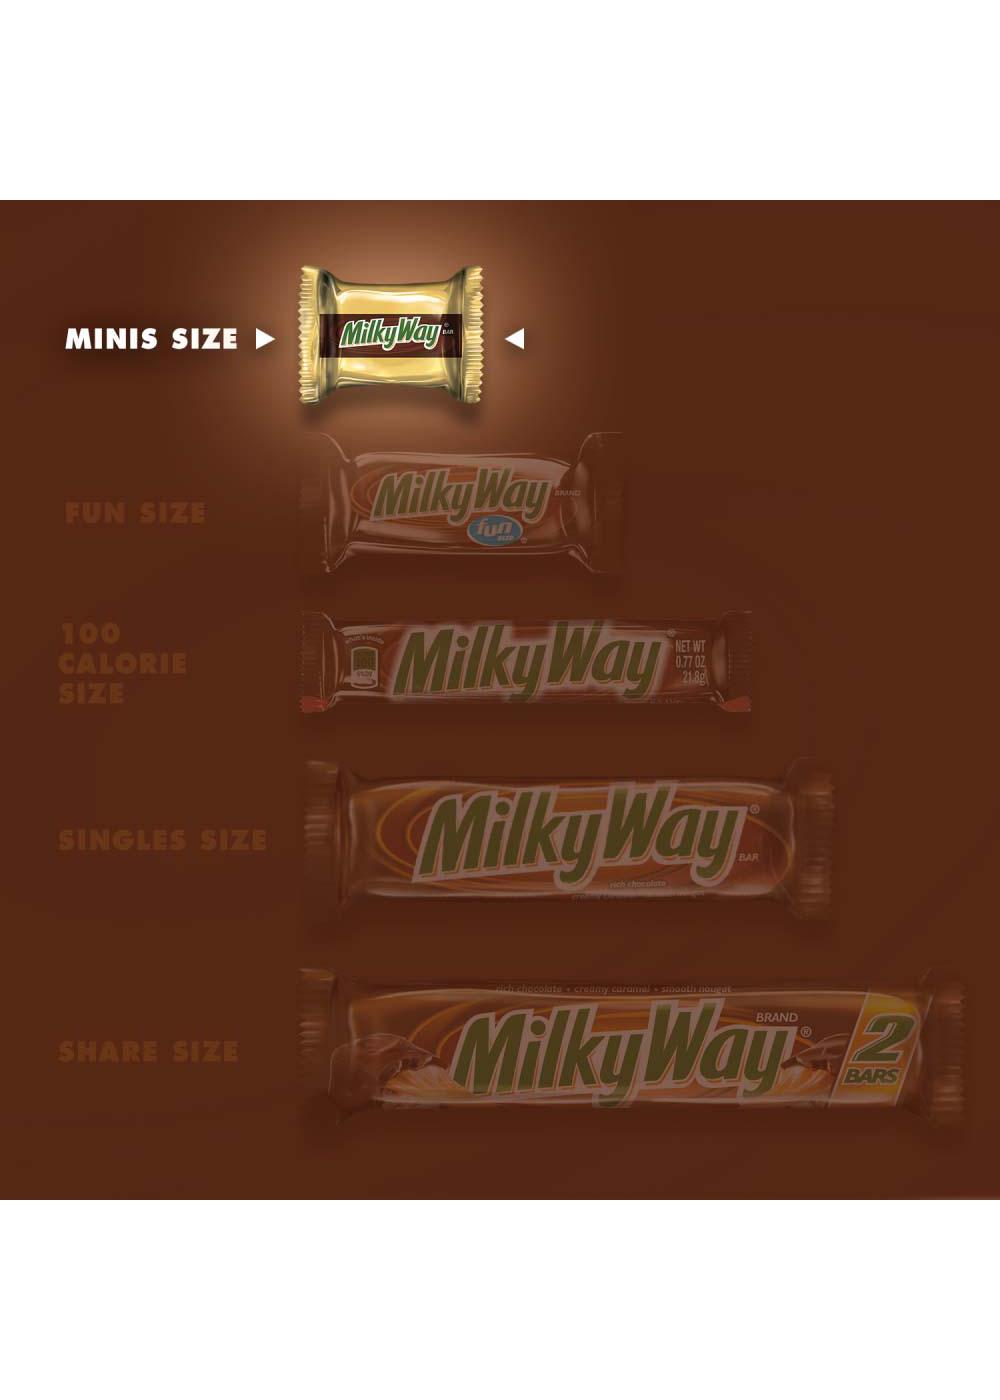 Milky Way Minis Milk Chocolate Candy Bars - Sharing Size; image 2 of 8